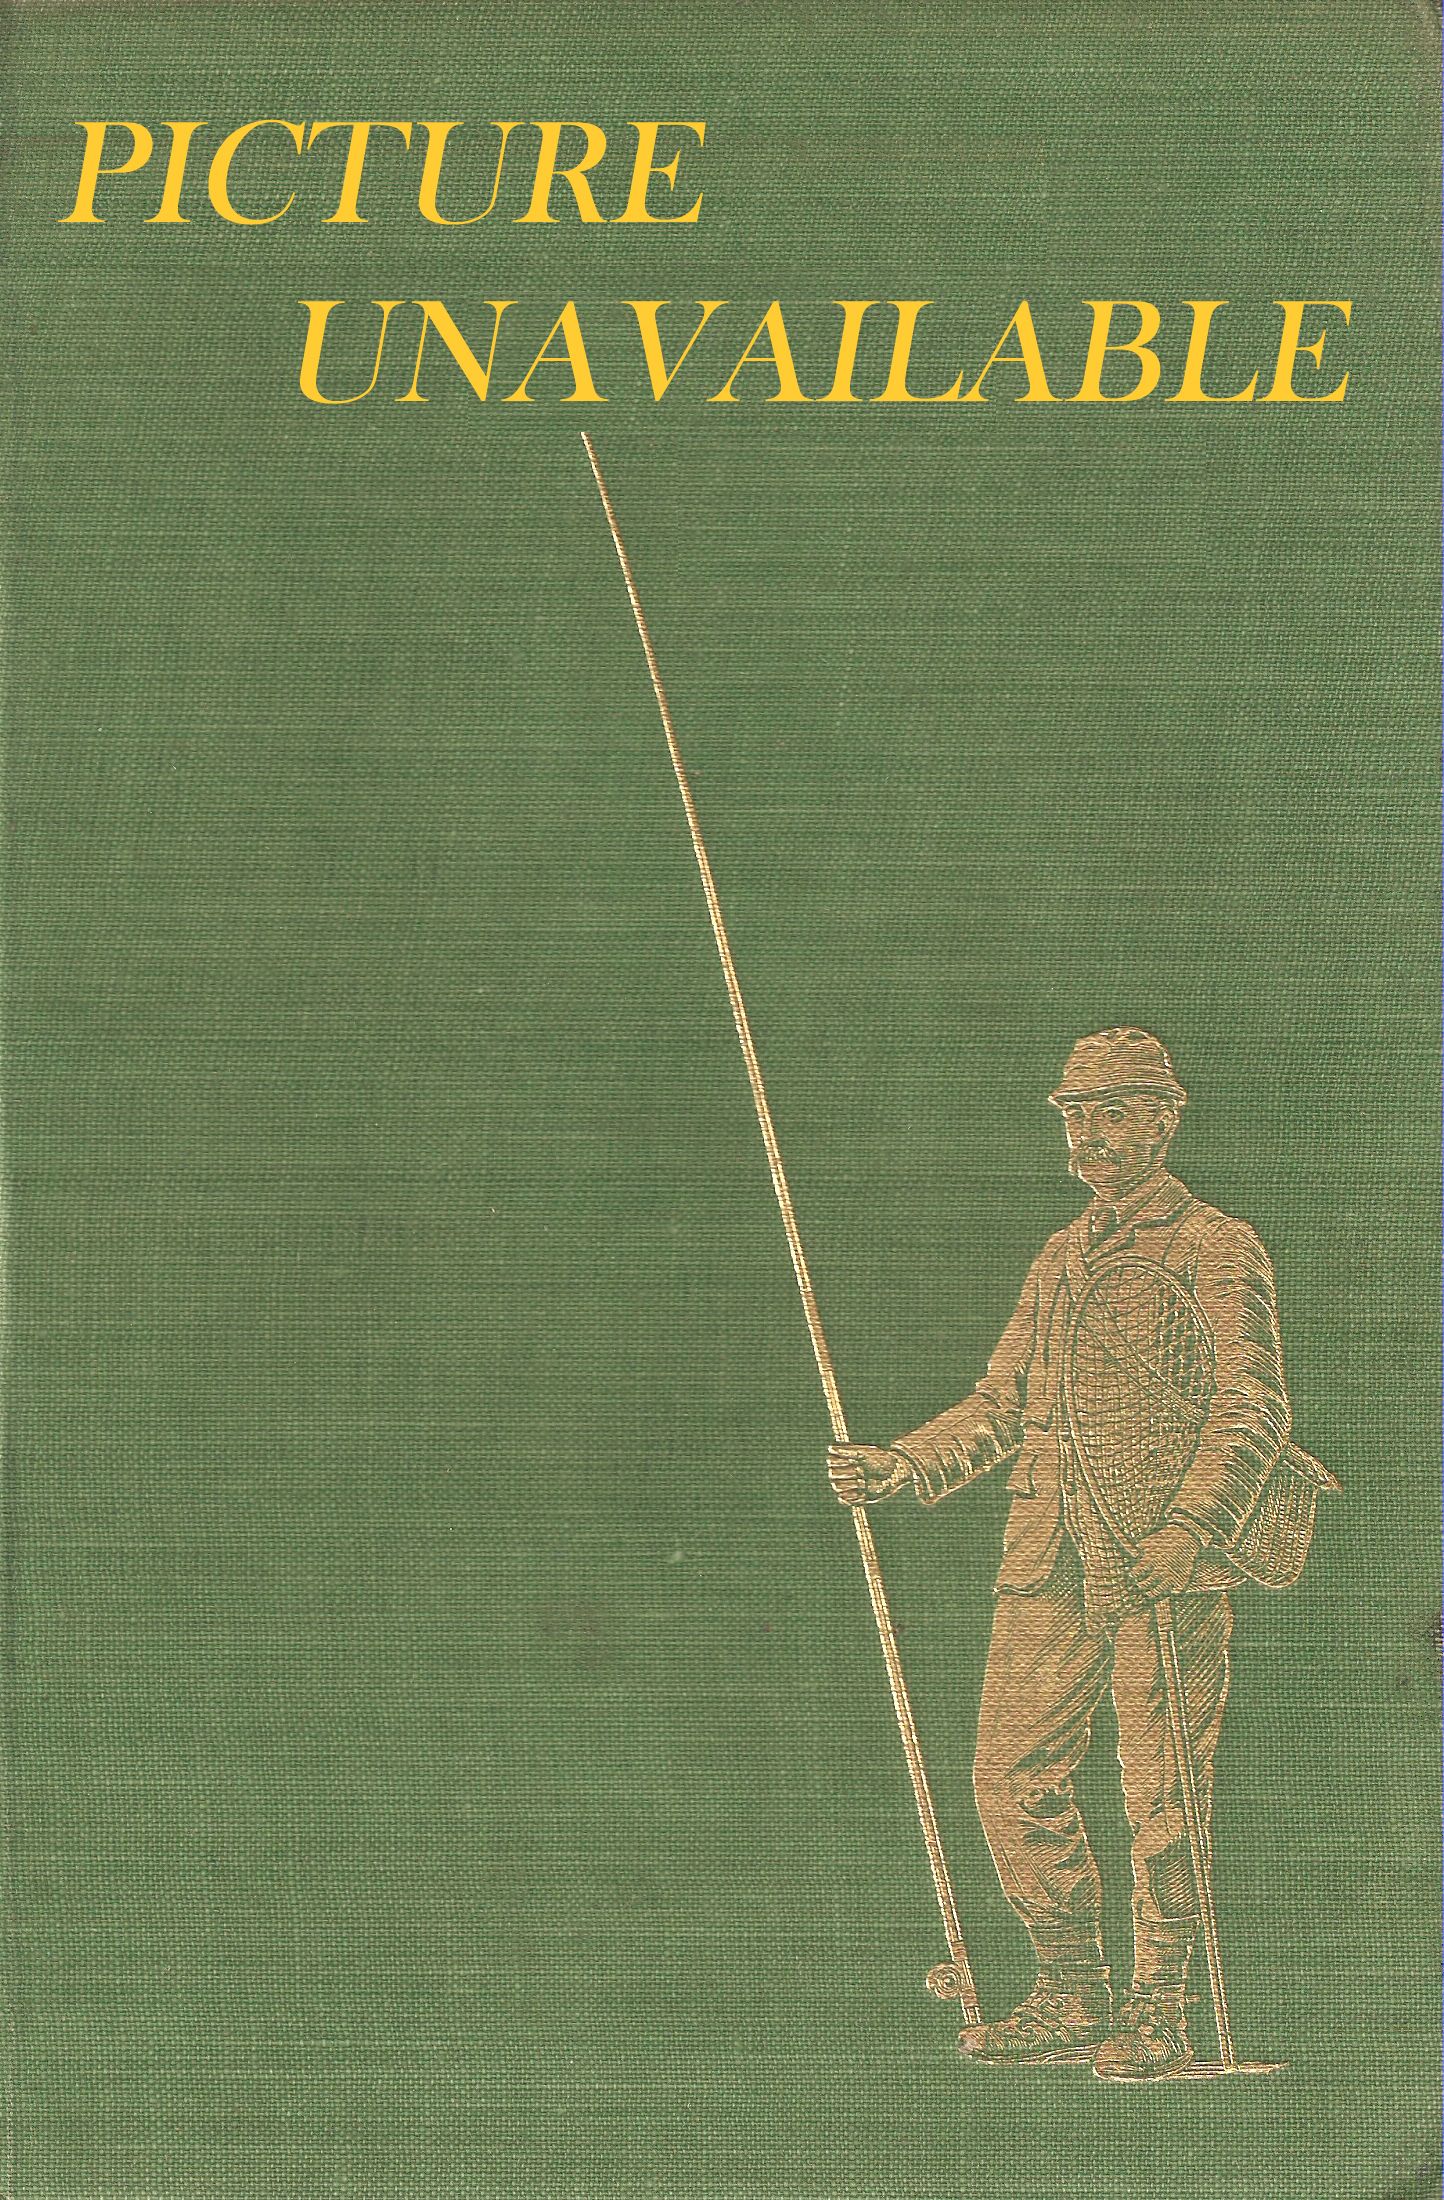 PIKE AND THE PIKE ANGLER. By Fred Buller. 1981 first edition - hardback  issue.